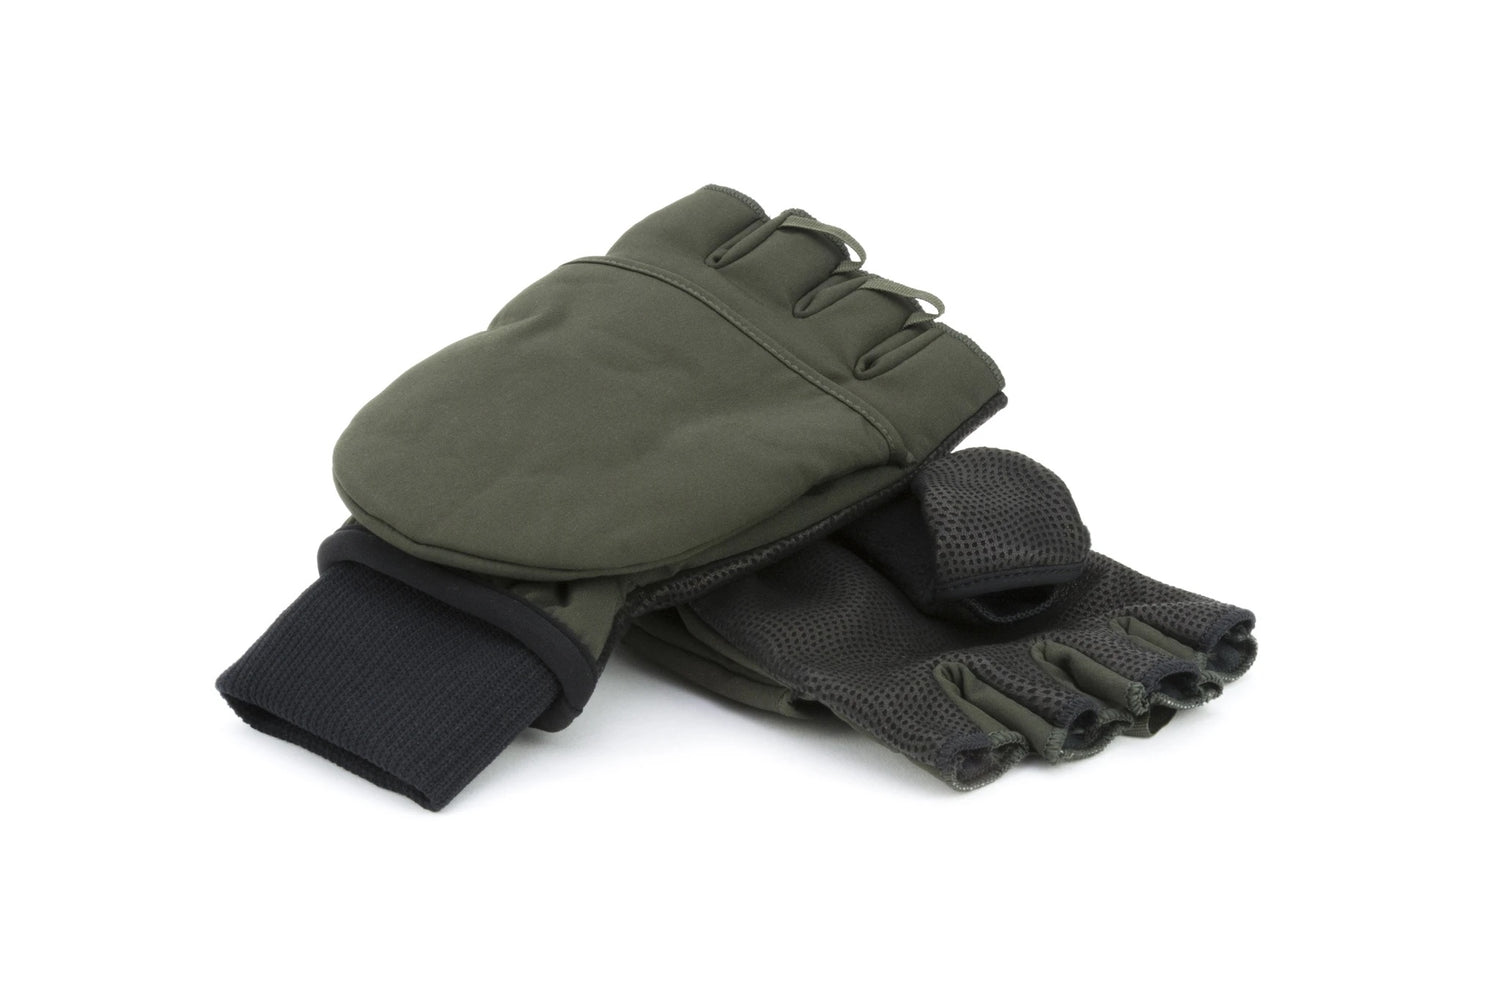 Windproof Cold Weather Convertible Mitt - Olive Green/Black